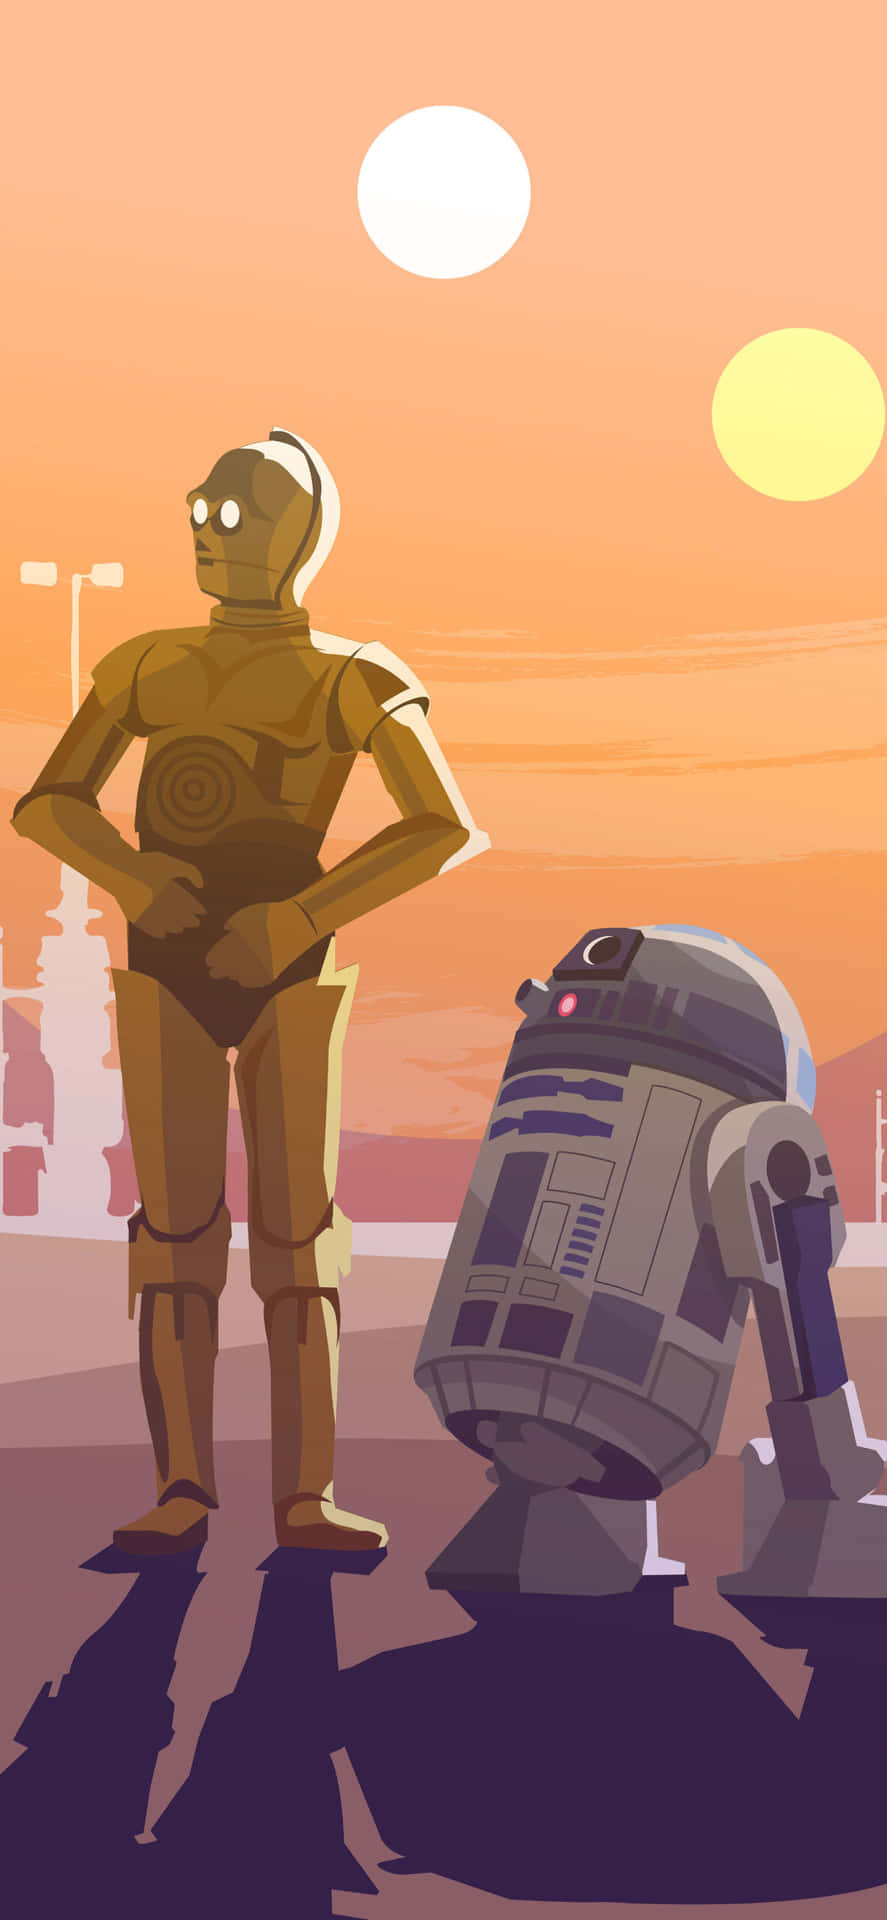 A Hero To Many, R2-d2 Is Here! Background